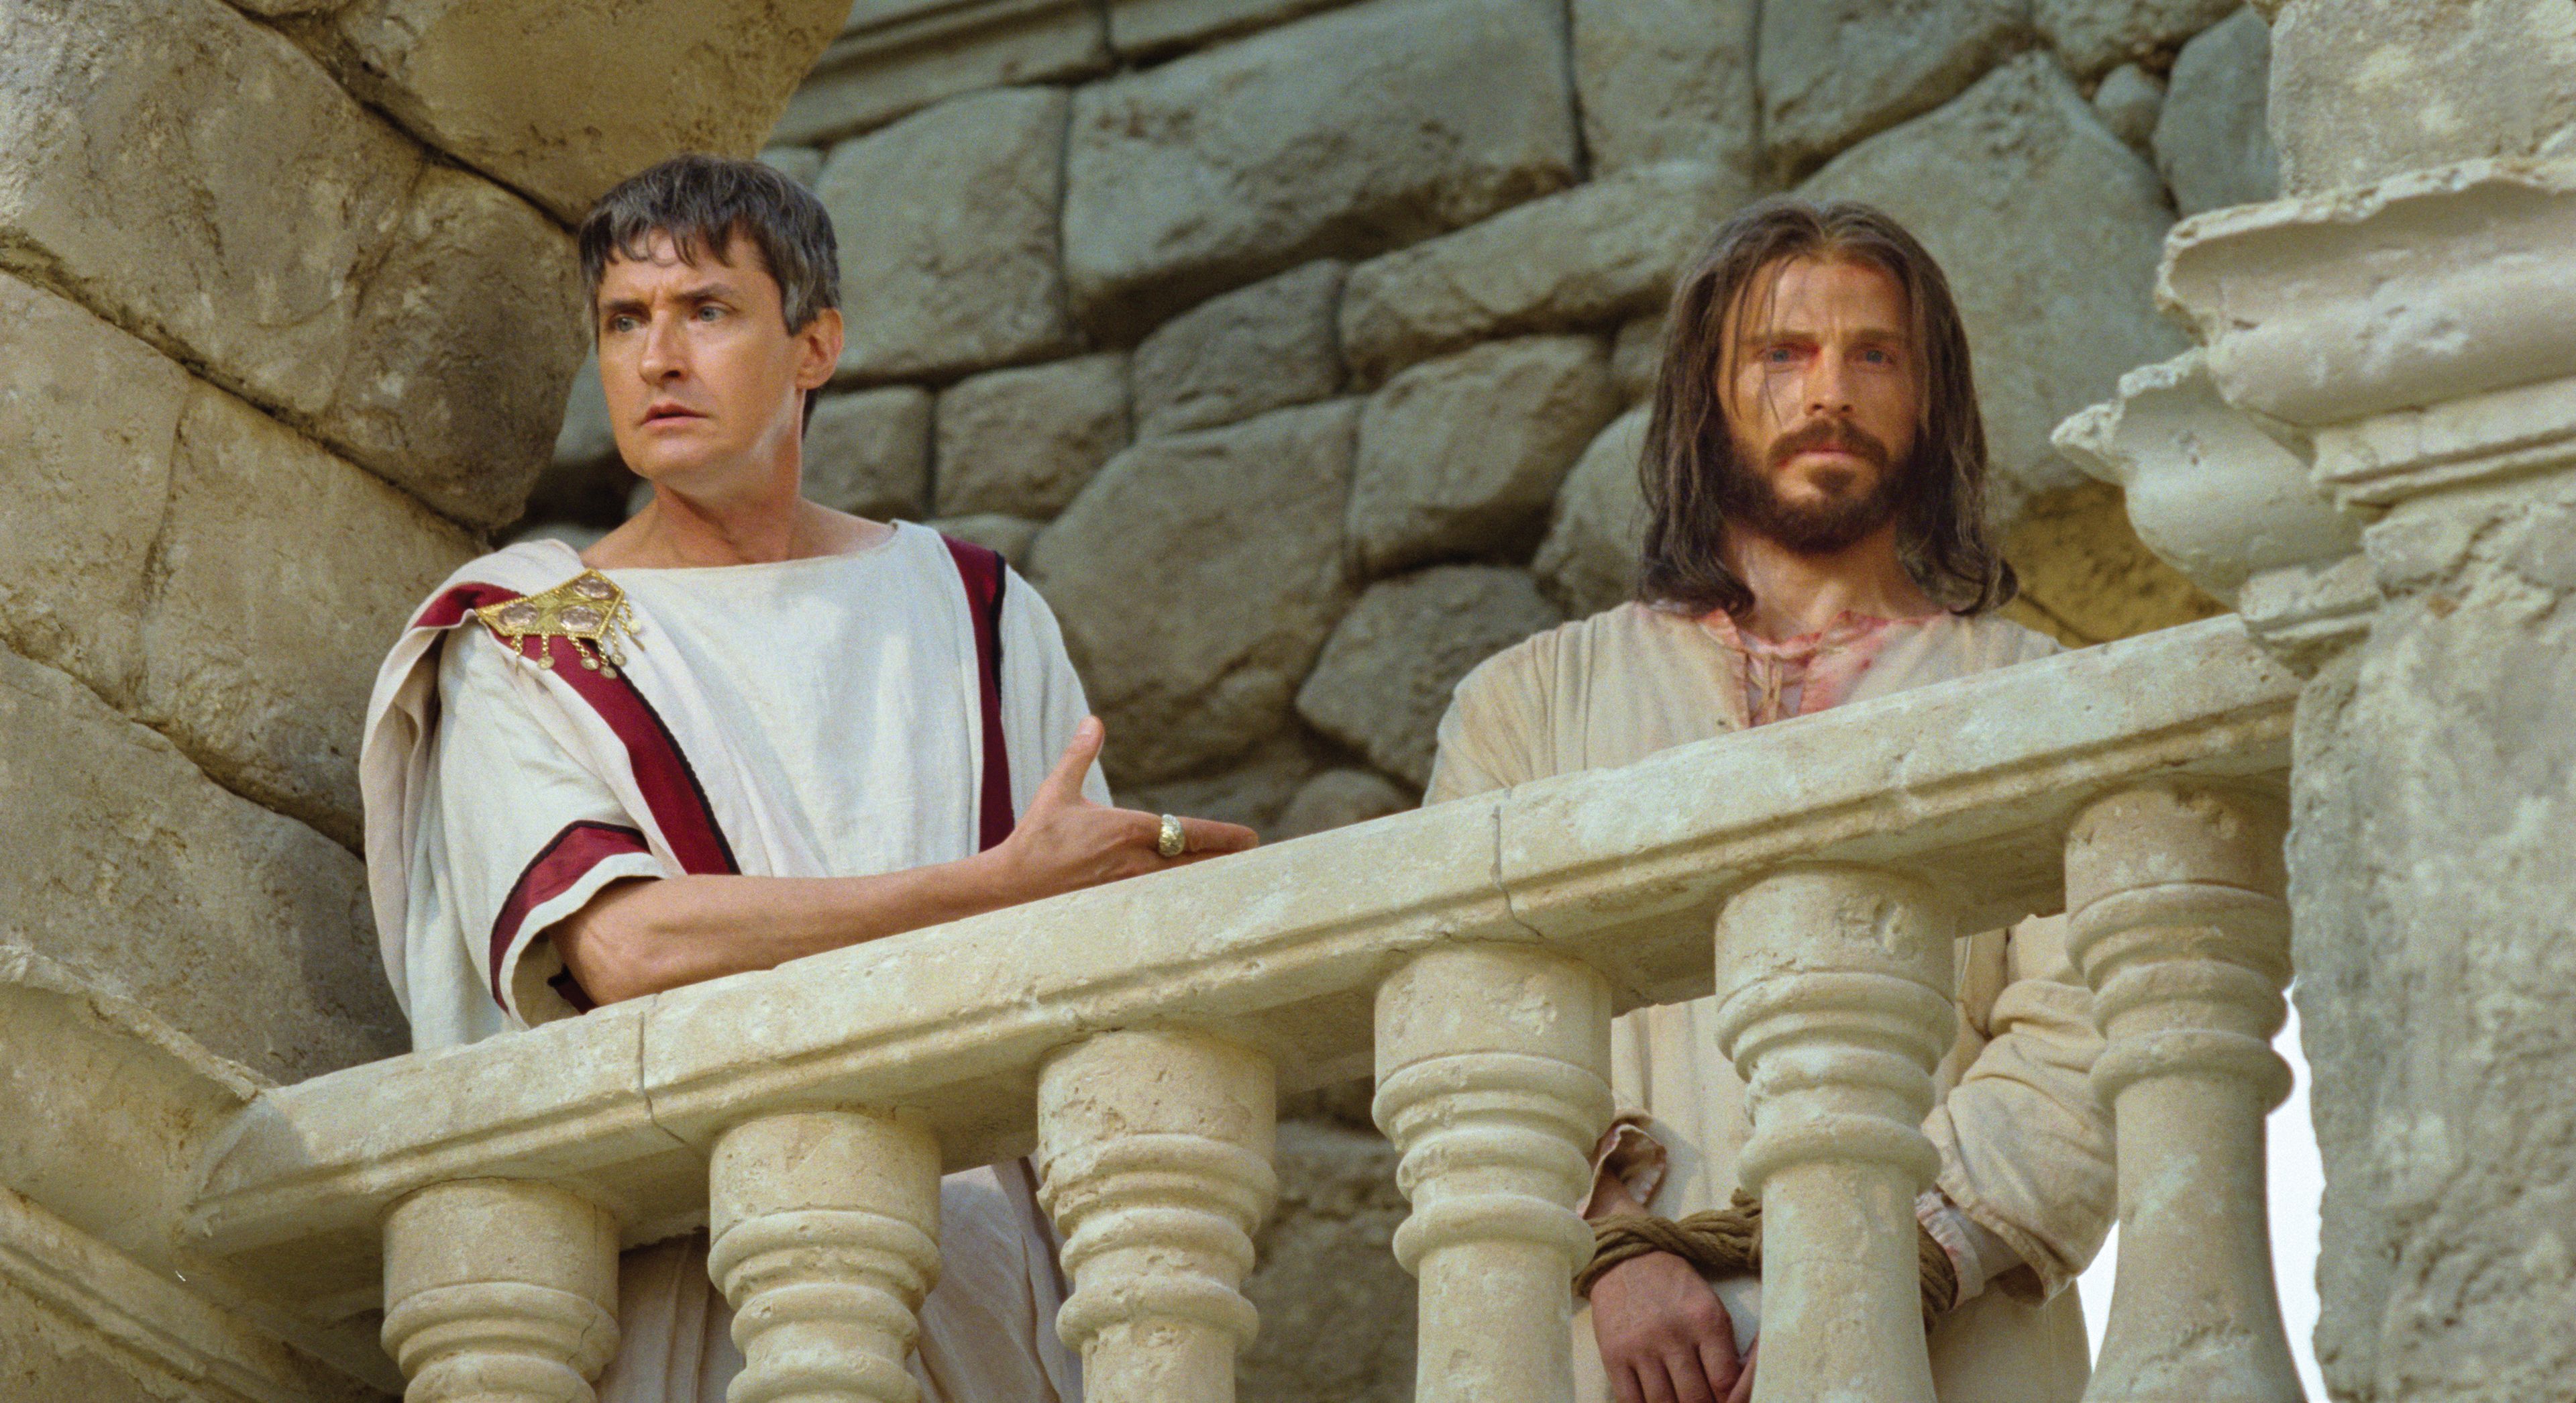 Pilate speaks to the crowd that condemns Christ.